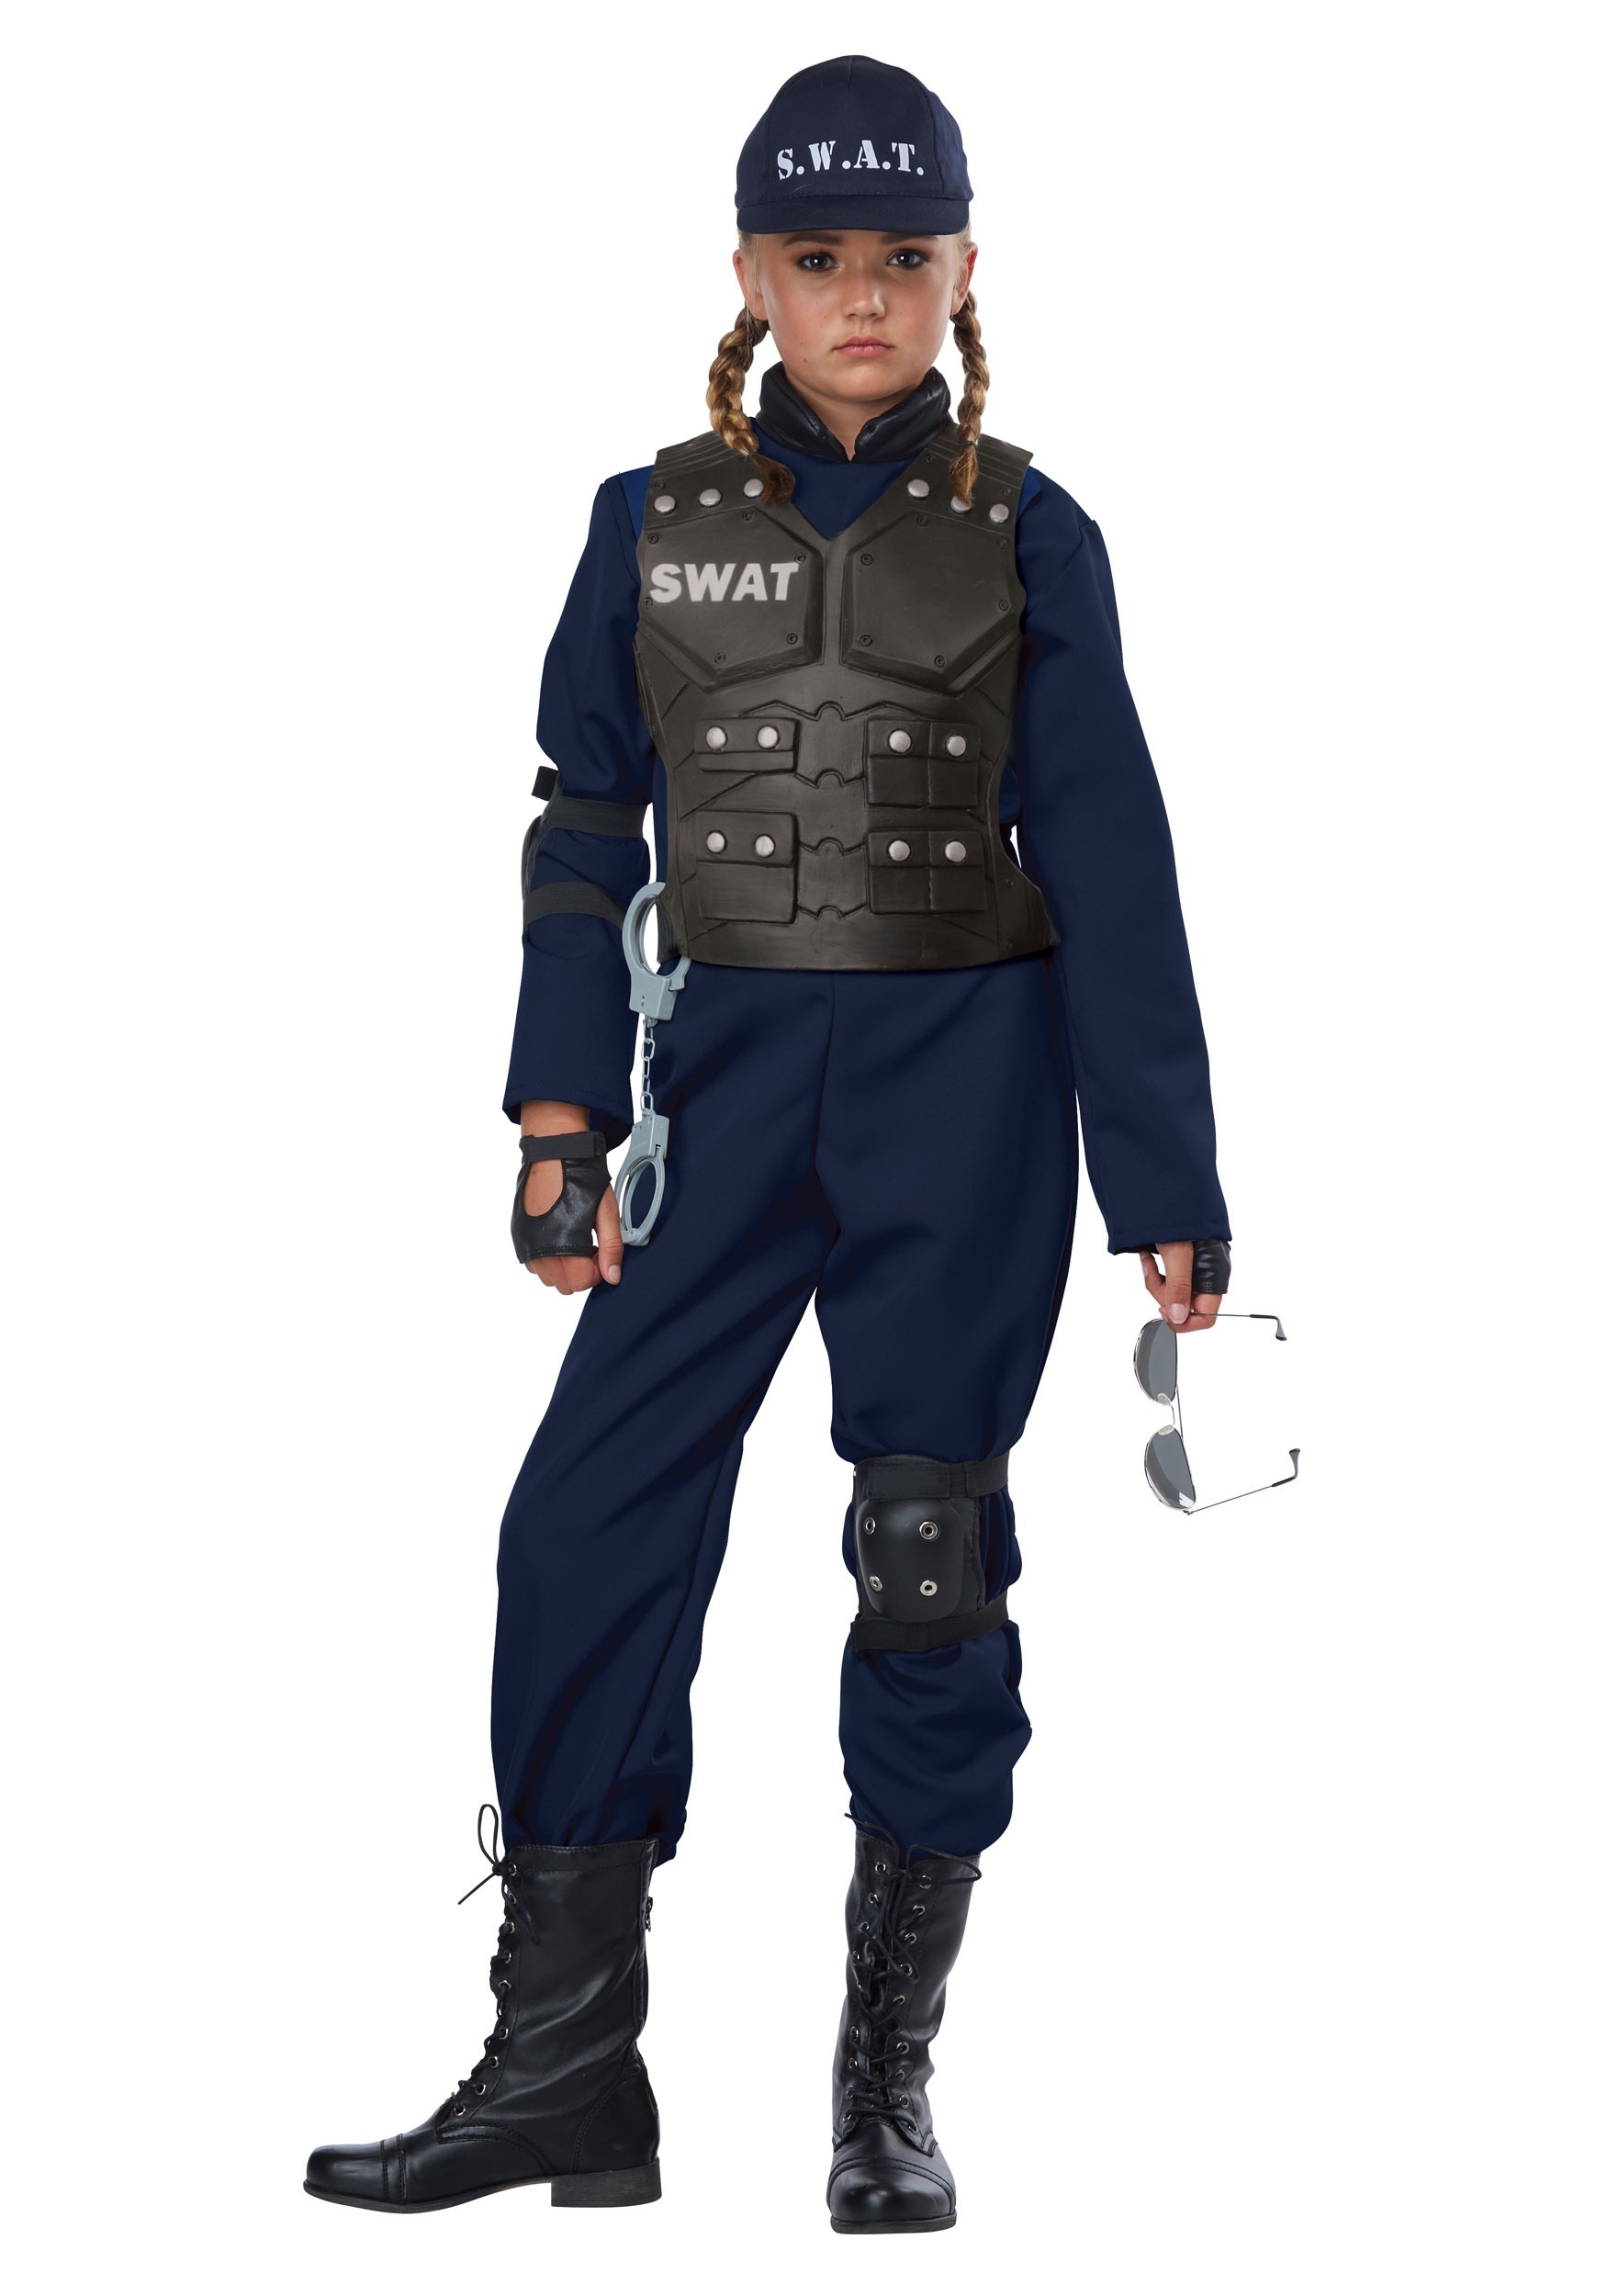 Junior SWAT Costume for a Child